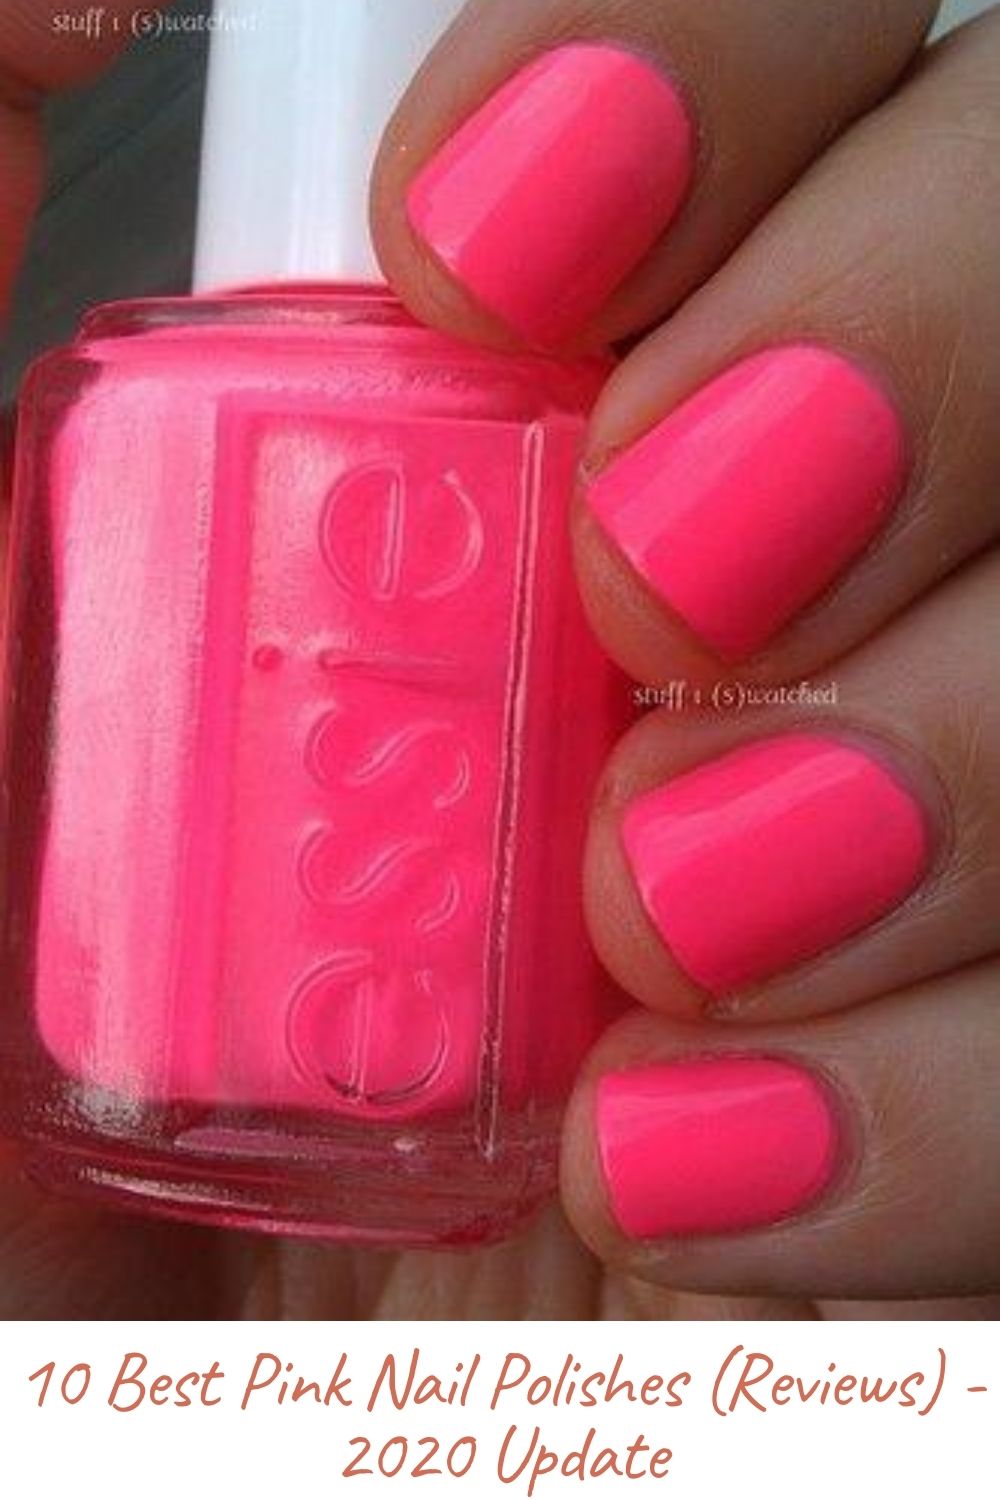 10 Best Pink Nail Polishes (Reviews) - 2020 Update